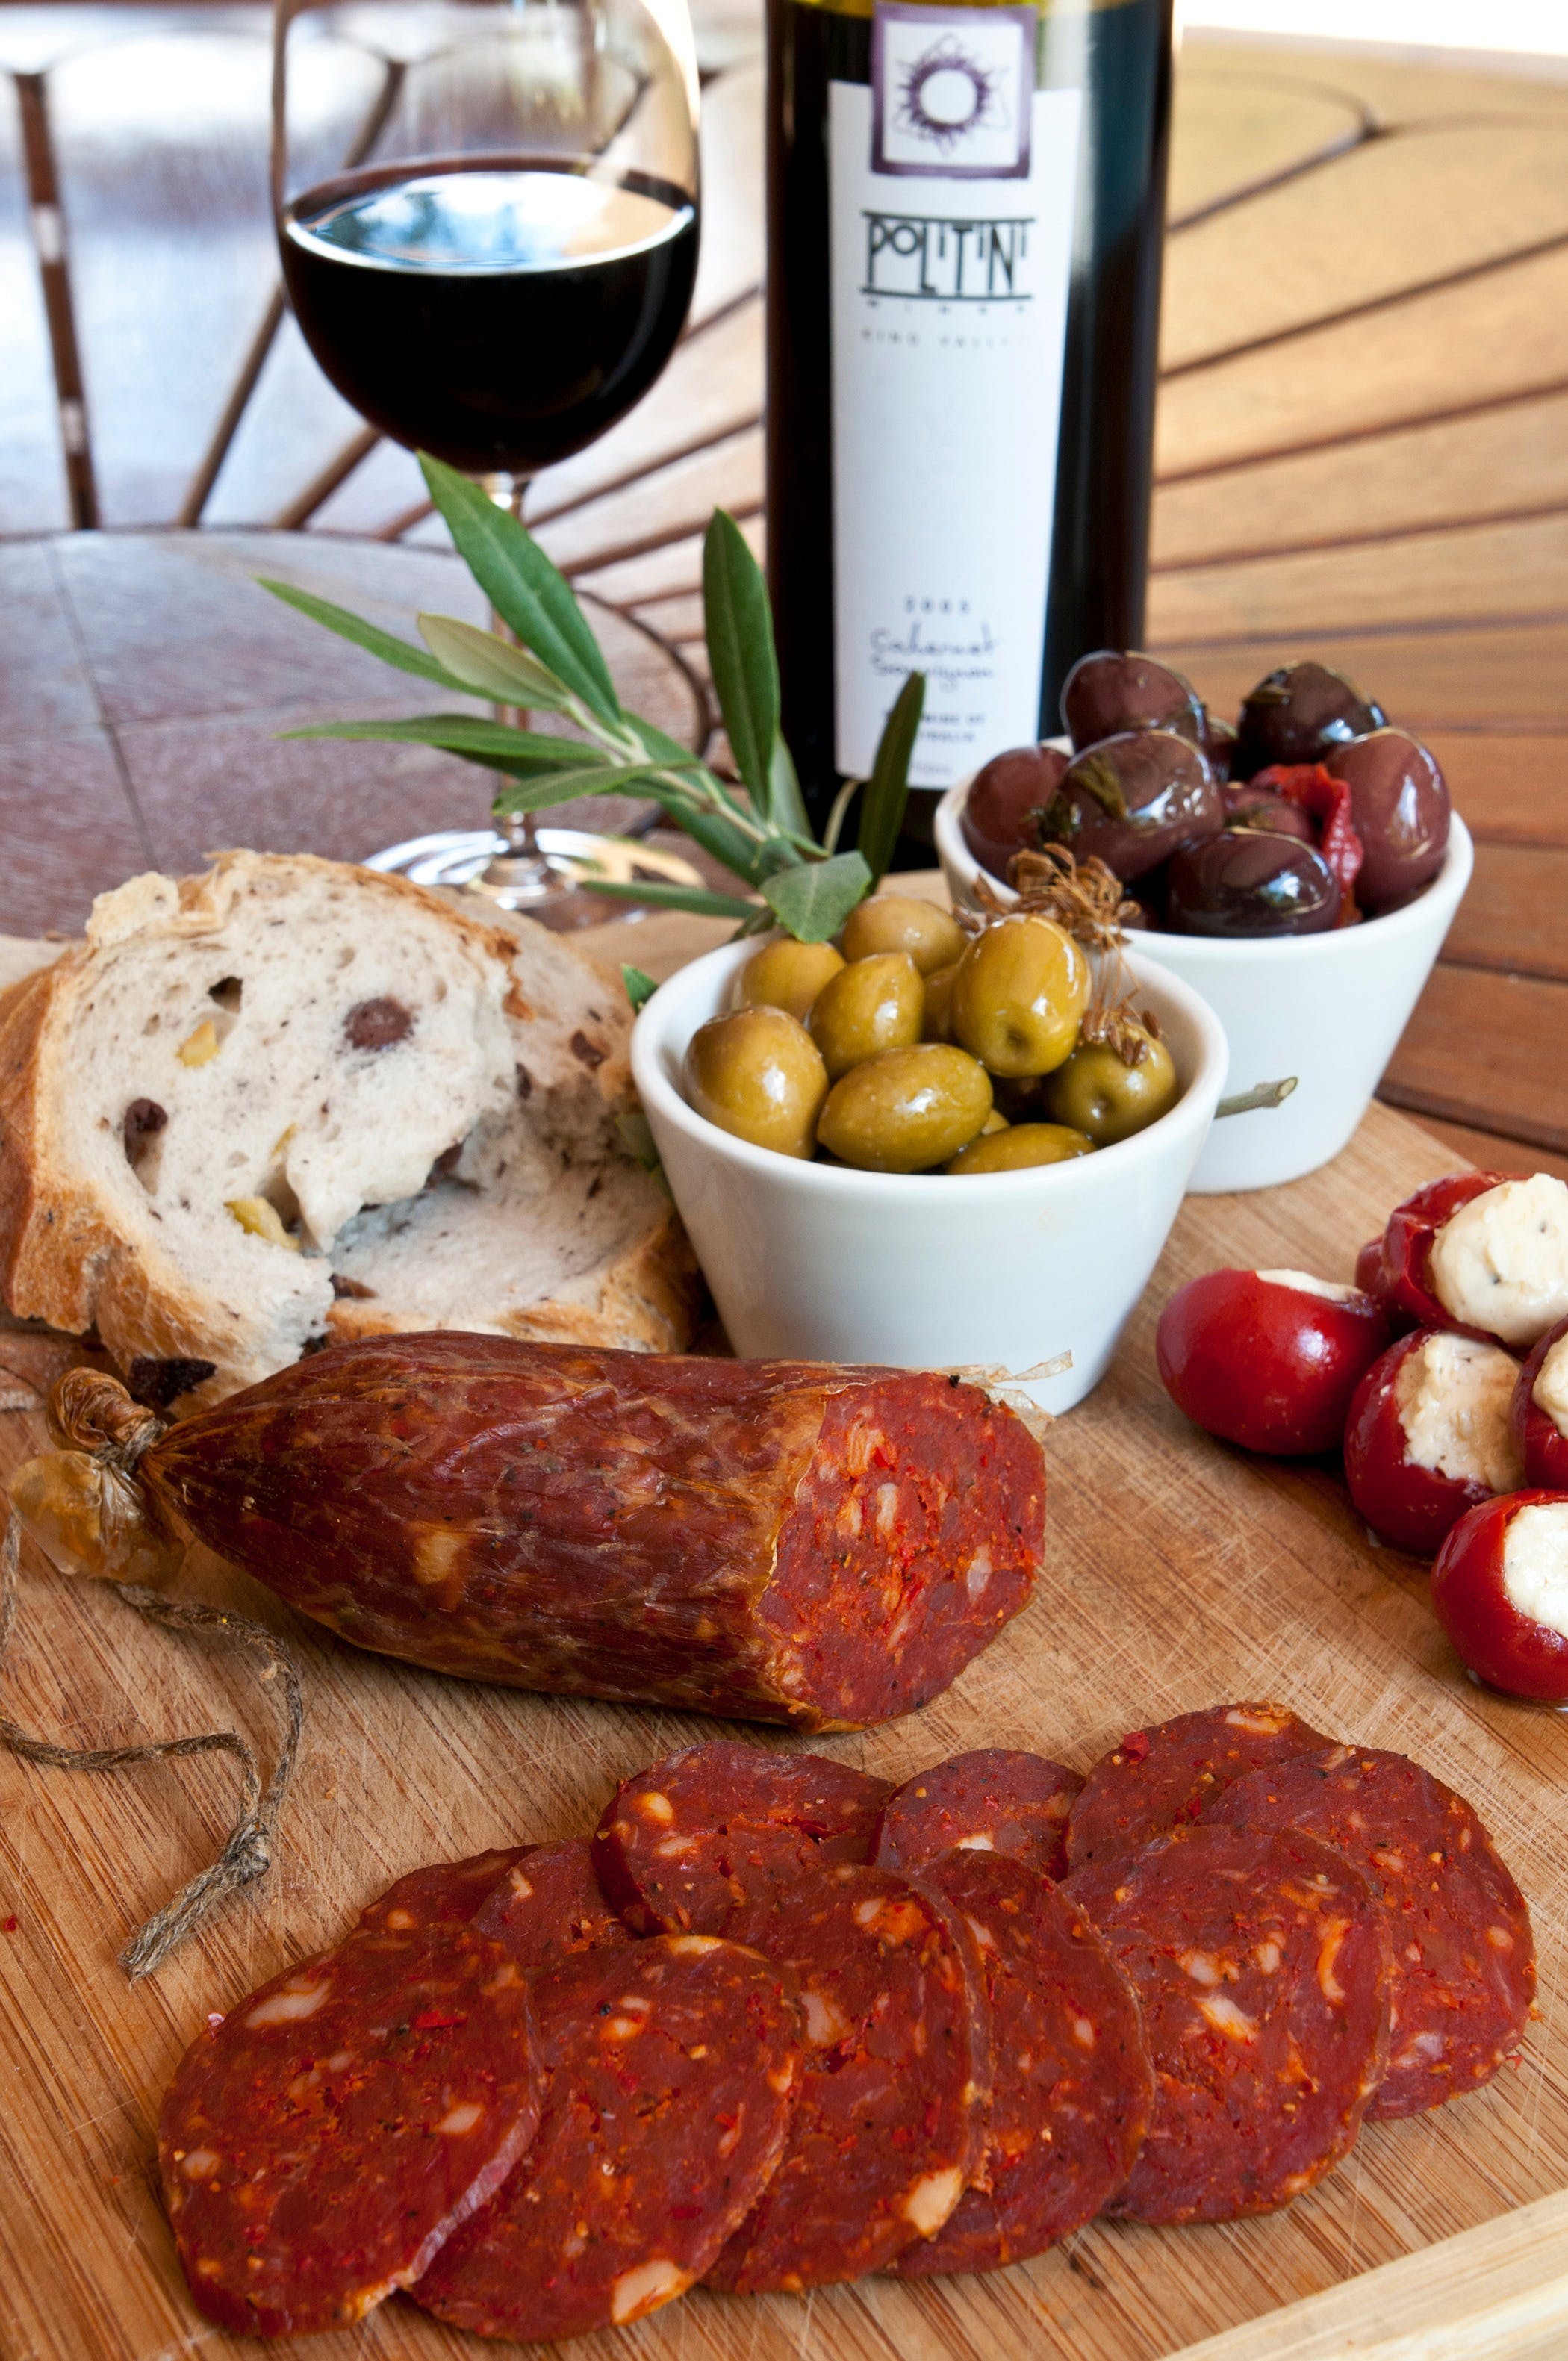 Salami and Salsicce Making classes at Politini Wines - Lennox Head Accommodation